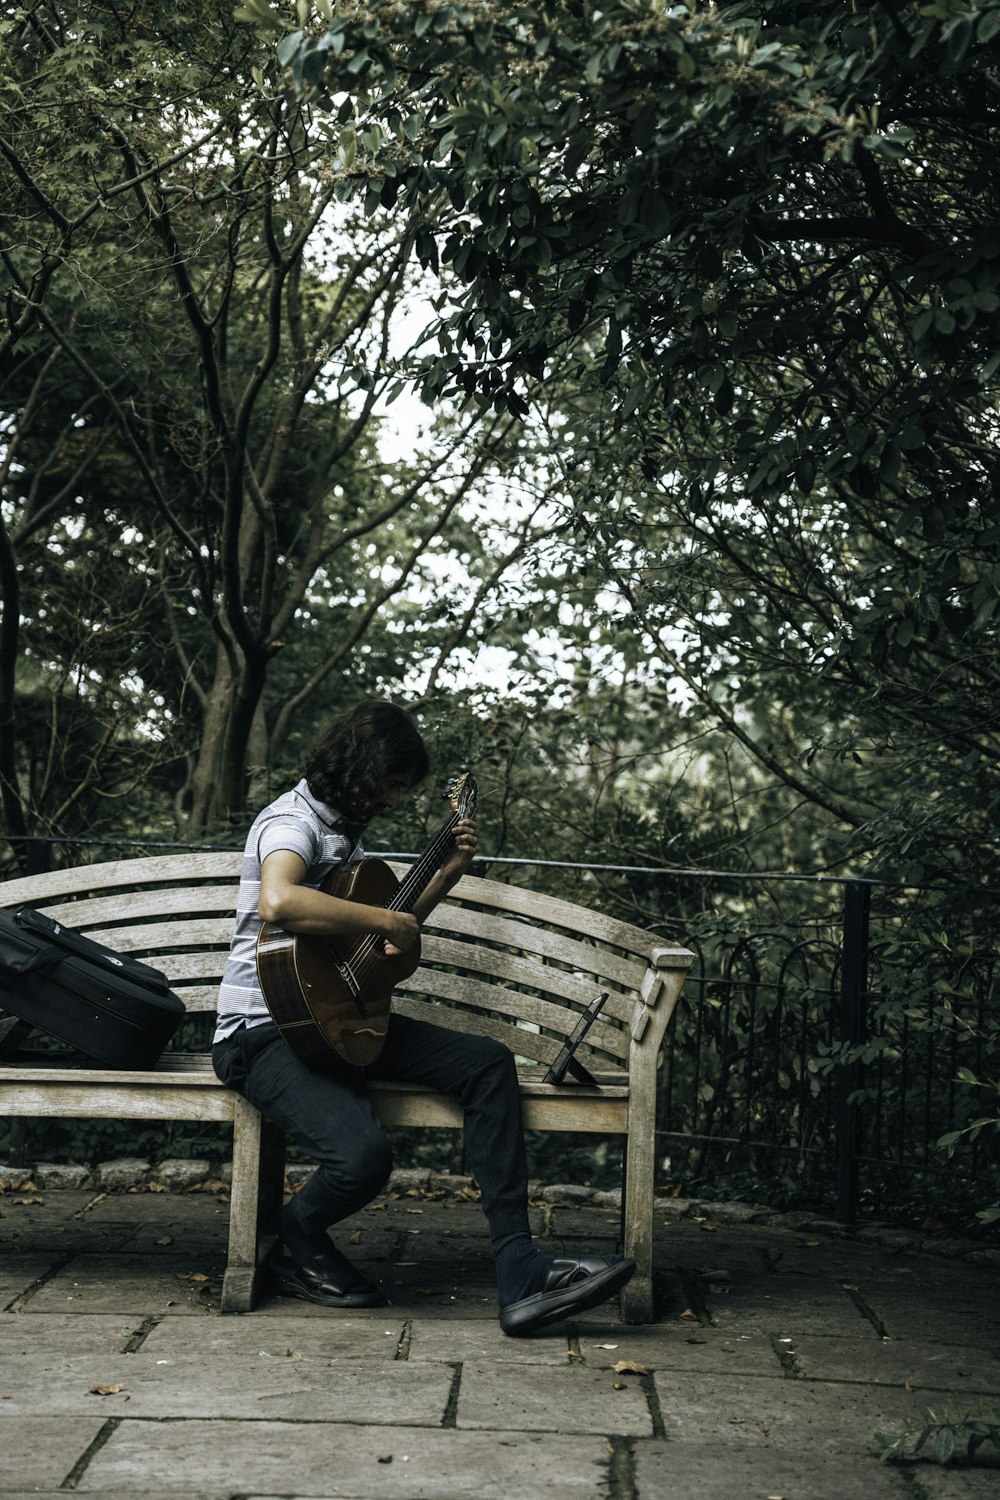 a person playing a guitar on a bench